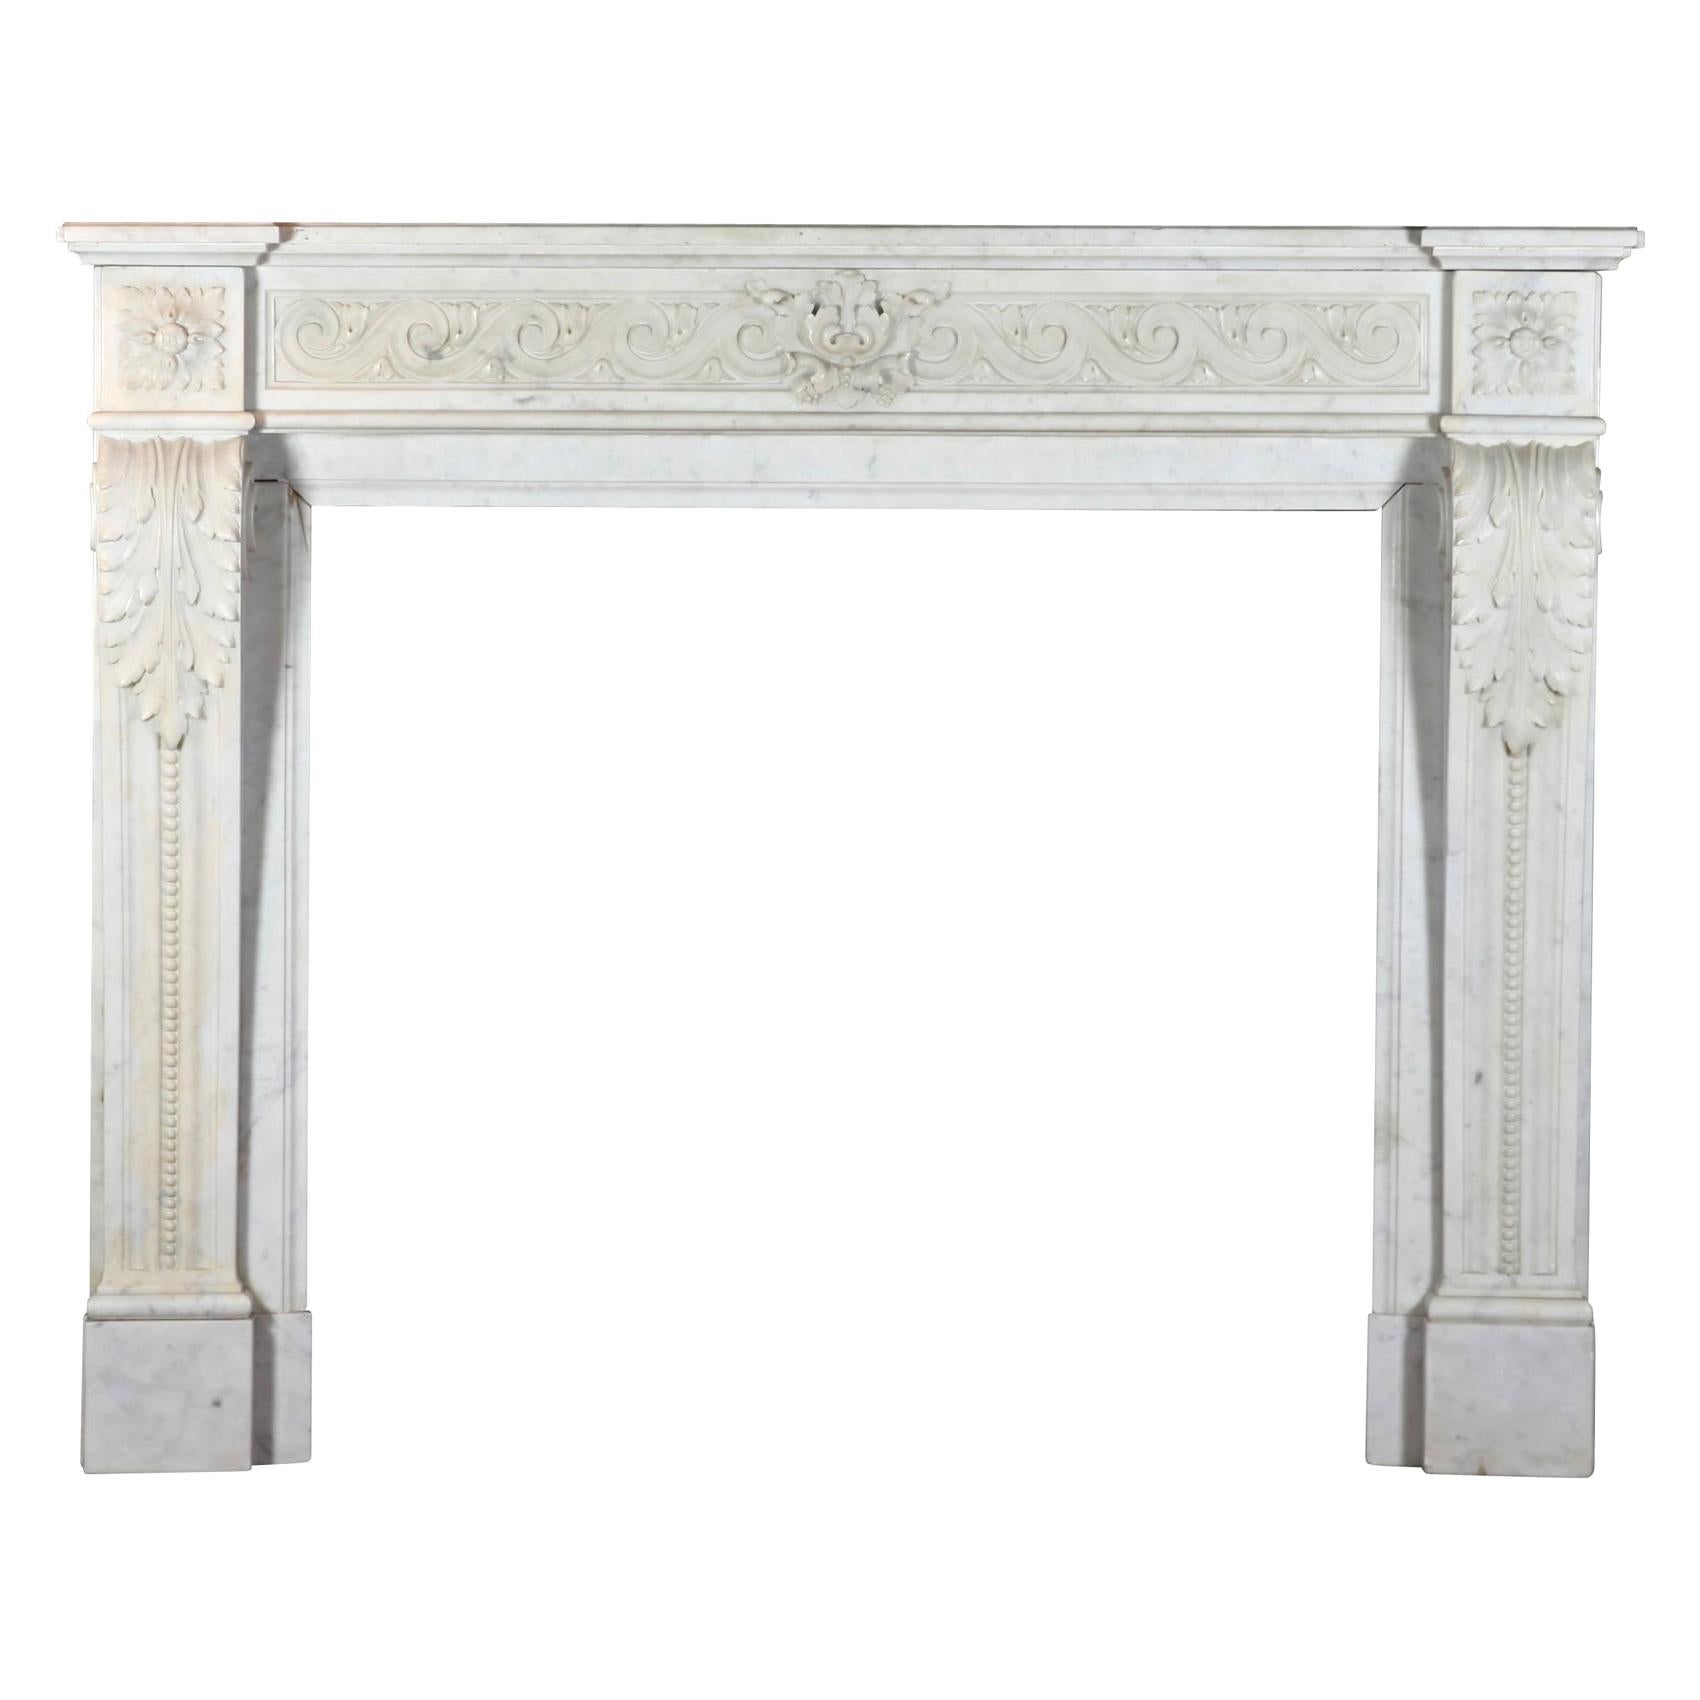 Fine Classic Vintage Fireplace Surround in White Carrara Marble For Sale